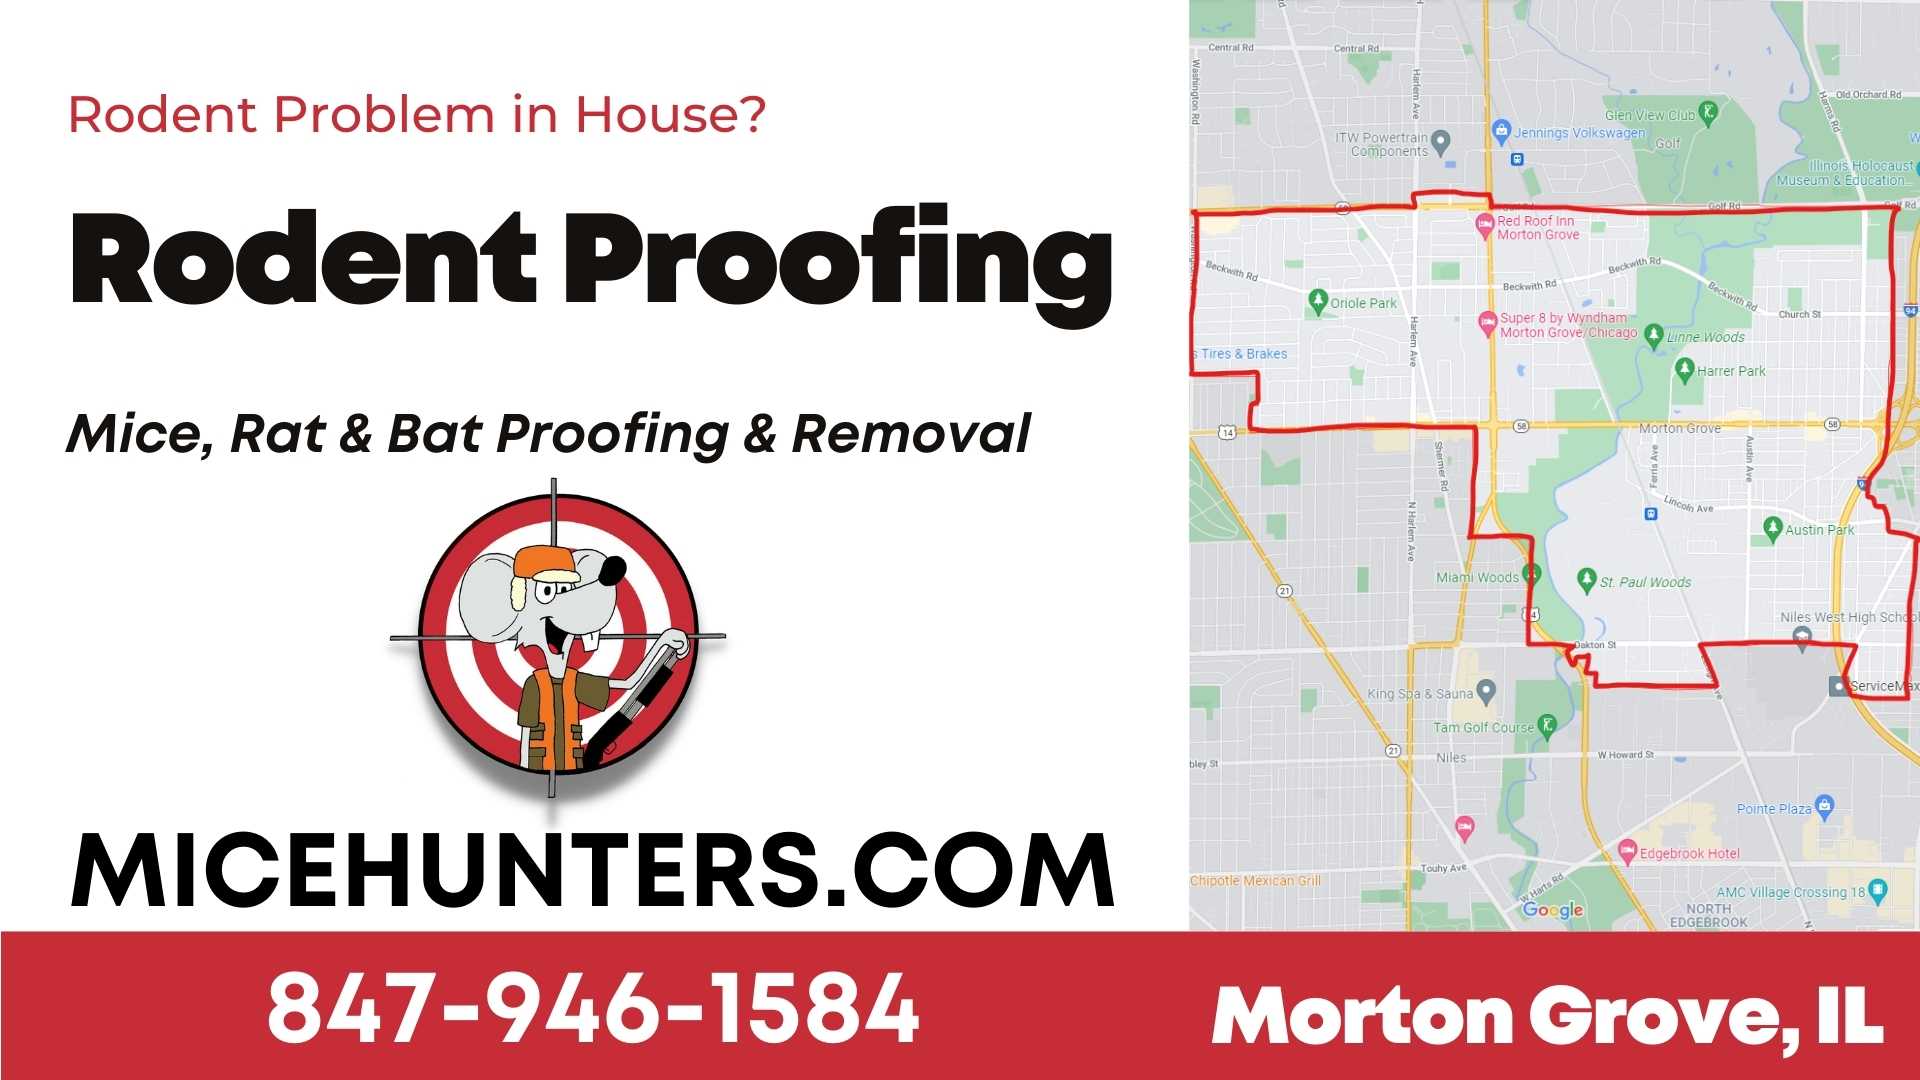 Morton Grove Rodent and Mice Proofing Exterminator Near Me